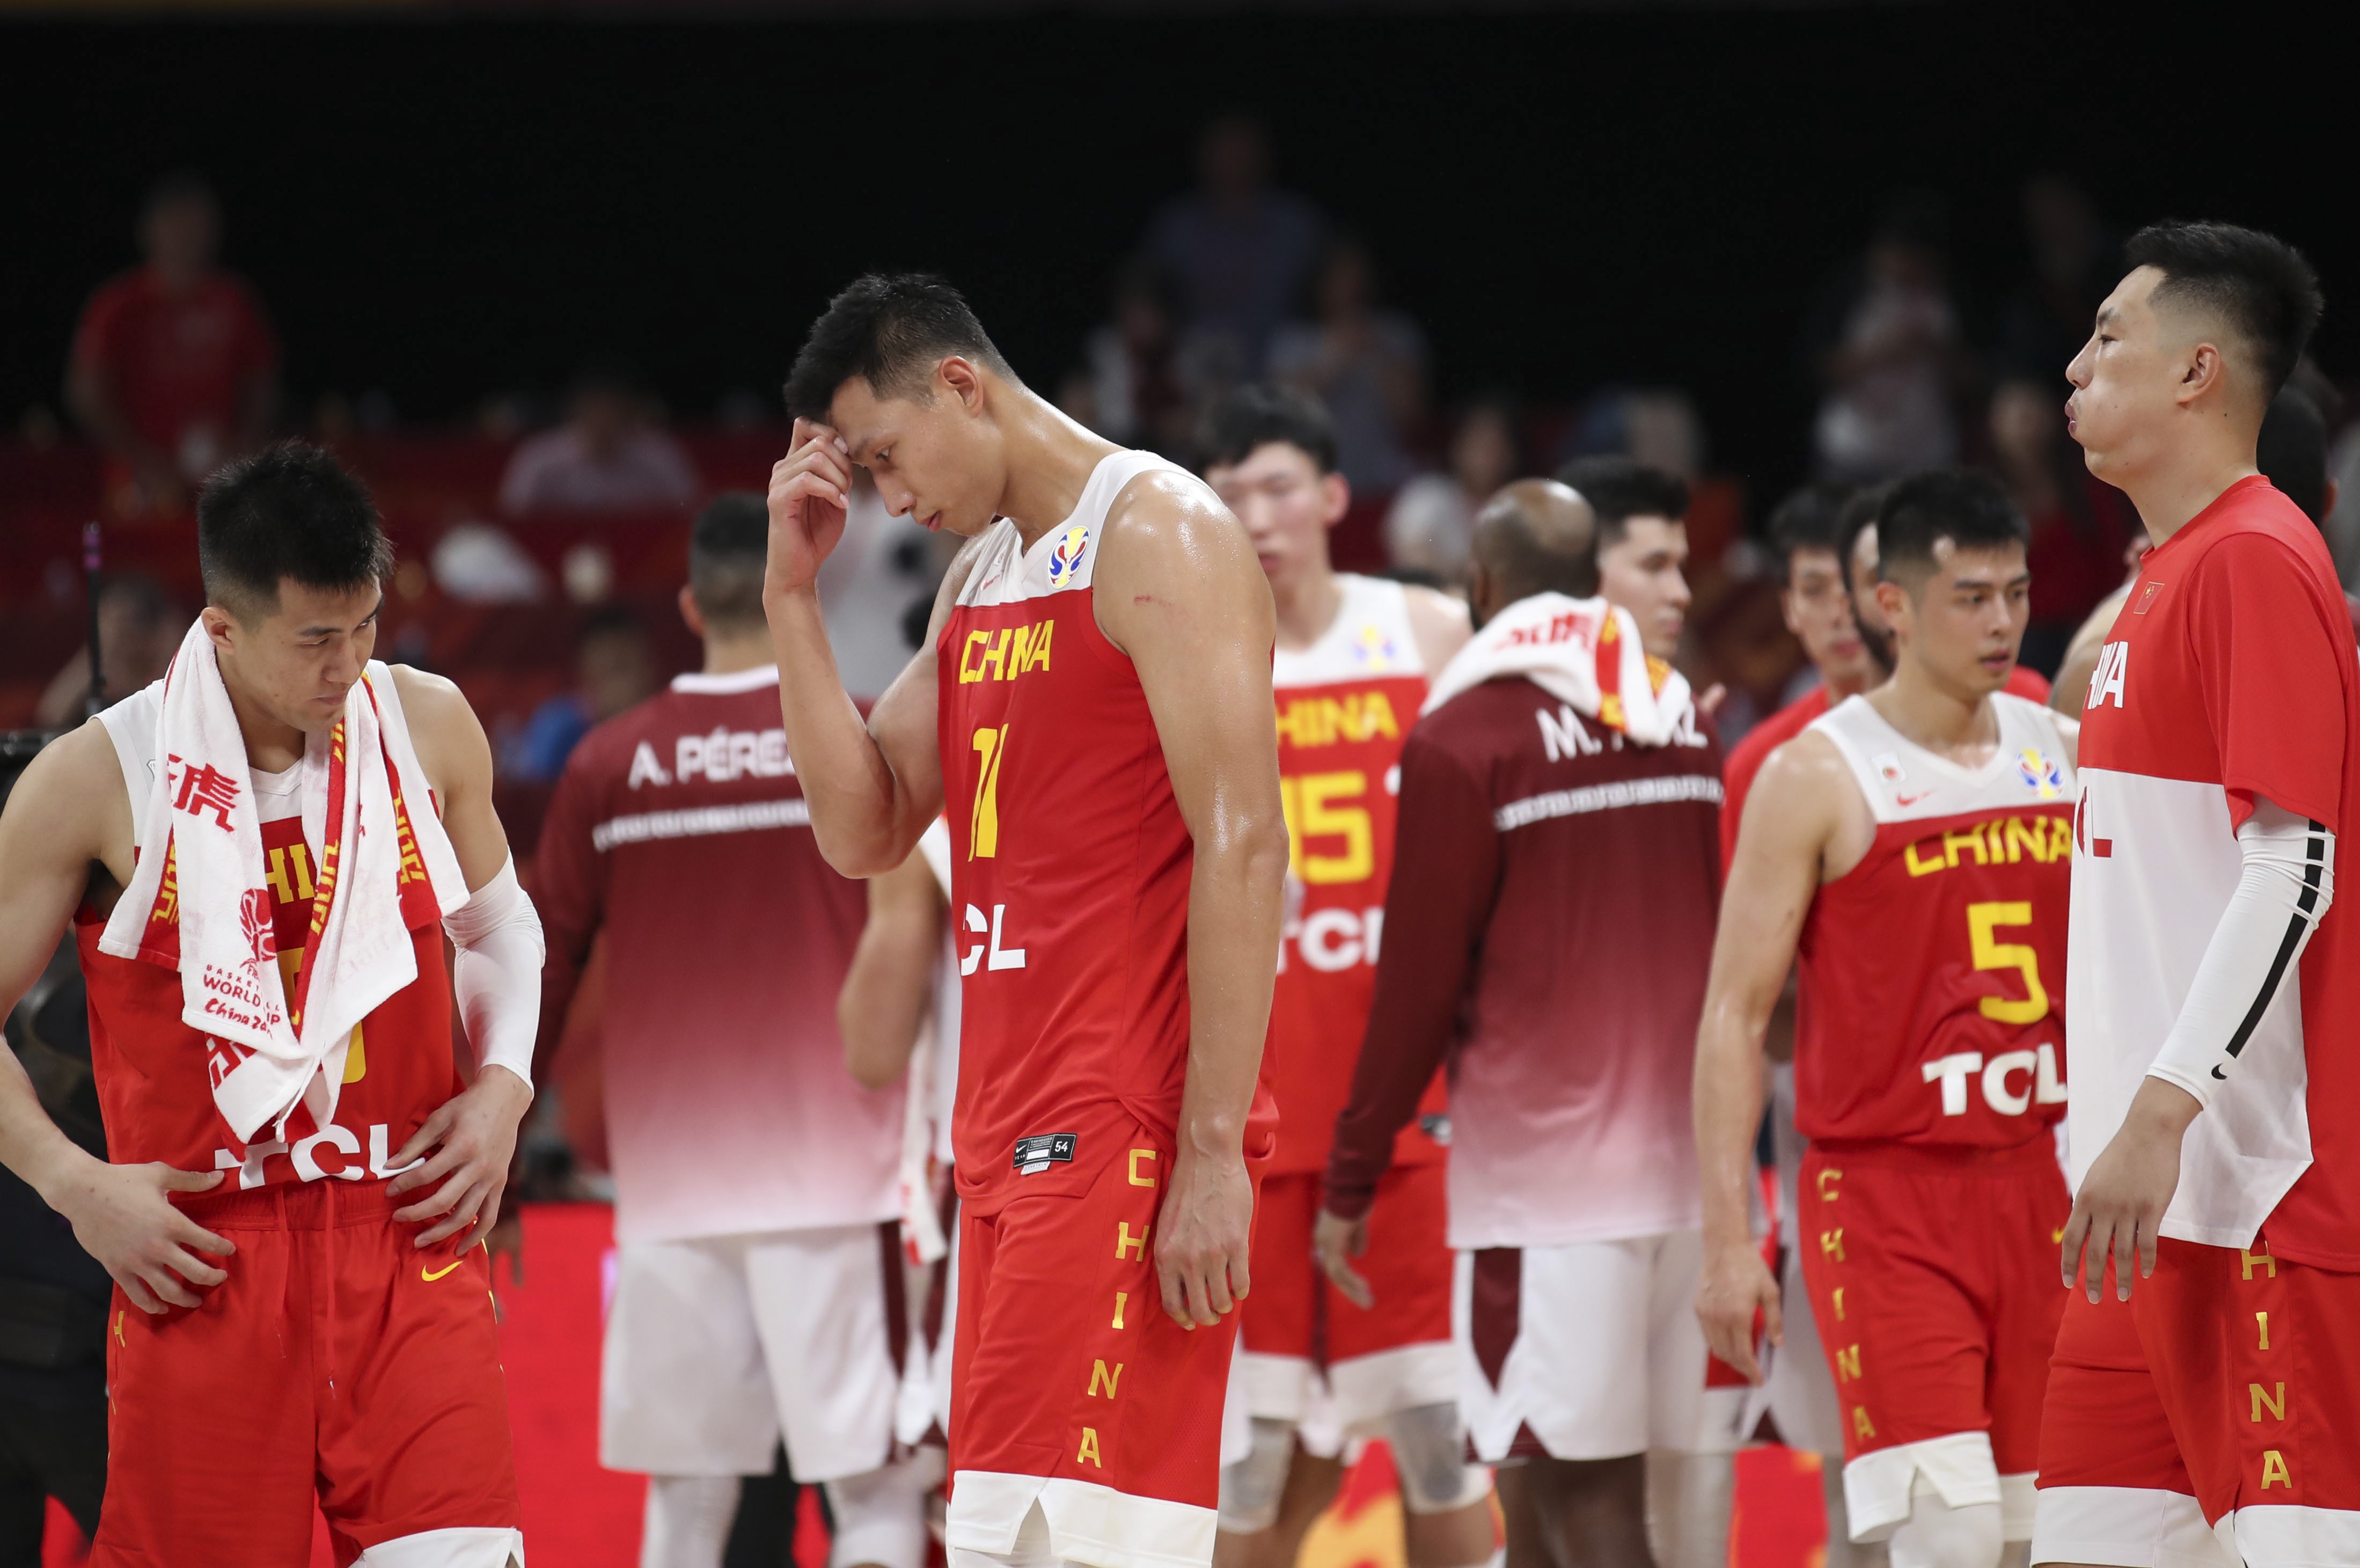 China’s men’s basketball team look dejected after losing to Venezuela at the 2019 Fiba World Cup in Beijing. Photo: Xinhua